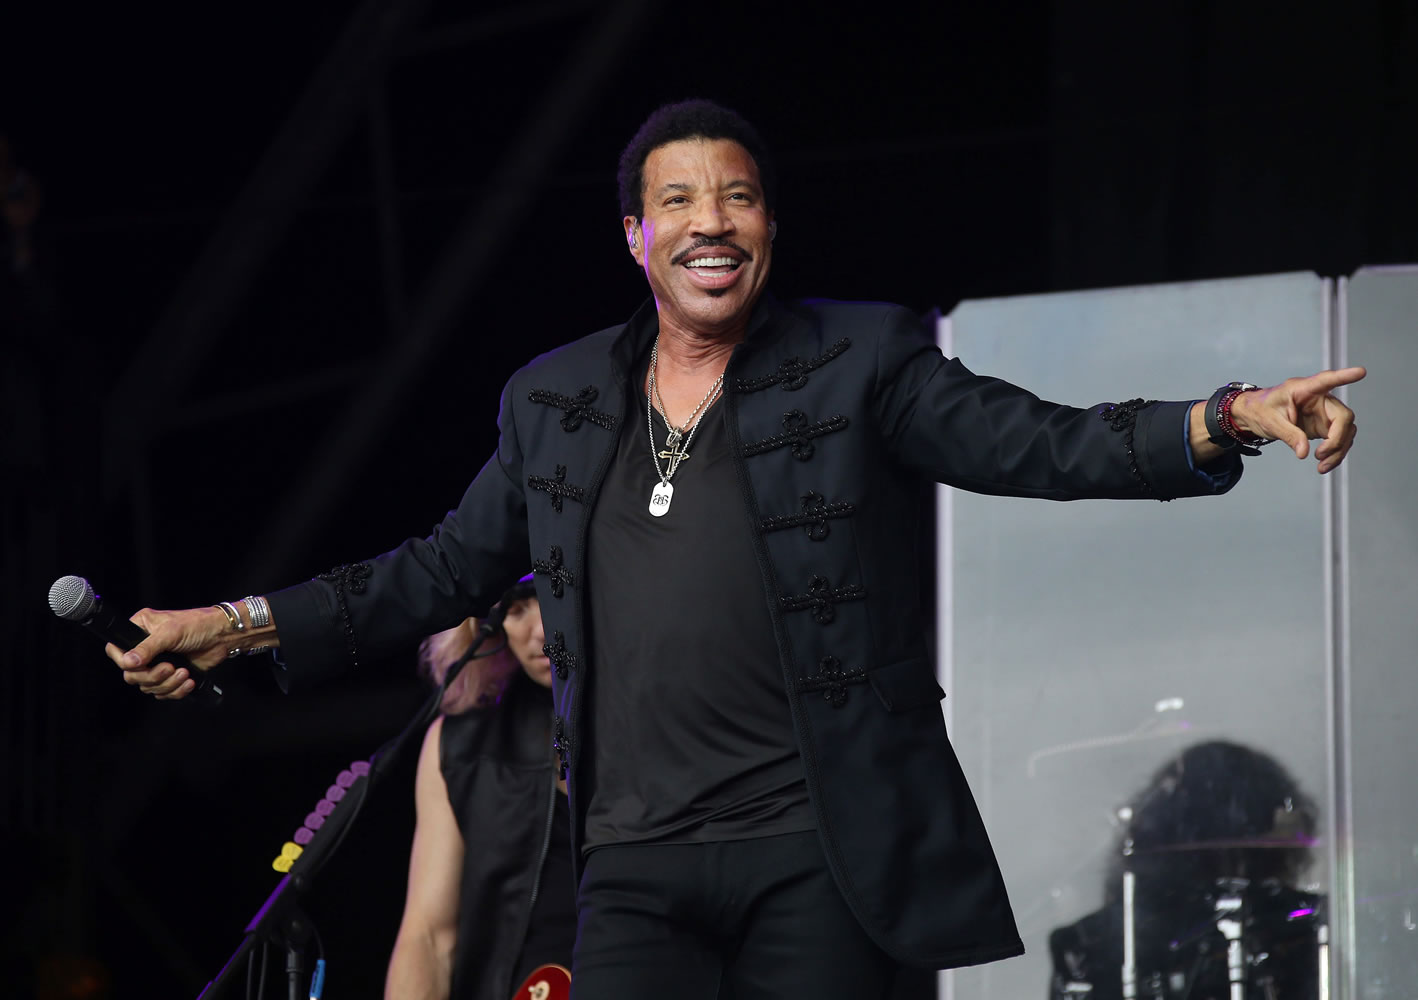 Lionel Richie performs on the Pyramid stage at Glastonbury music festival in June on Worthy Farm, Glastonbury, England.